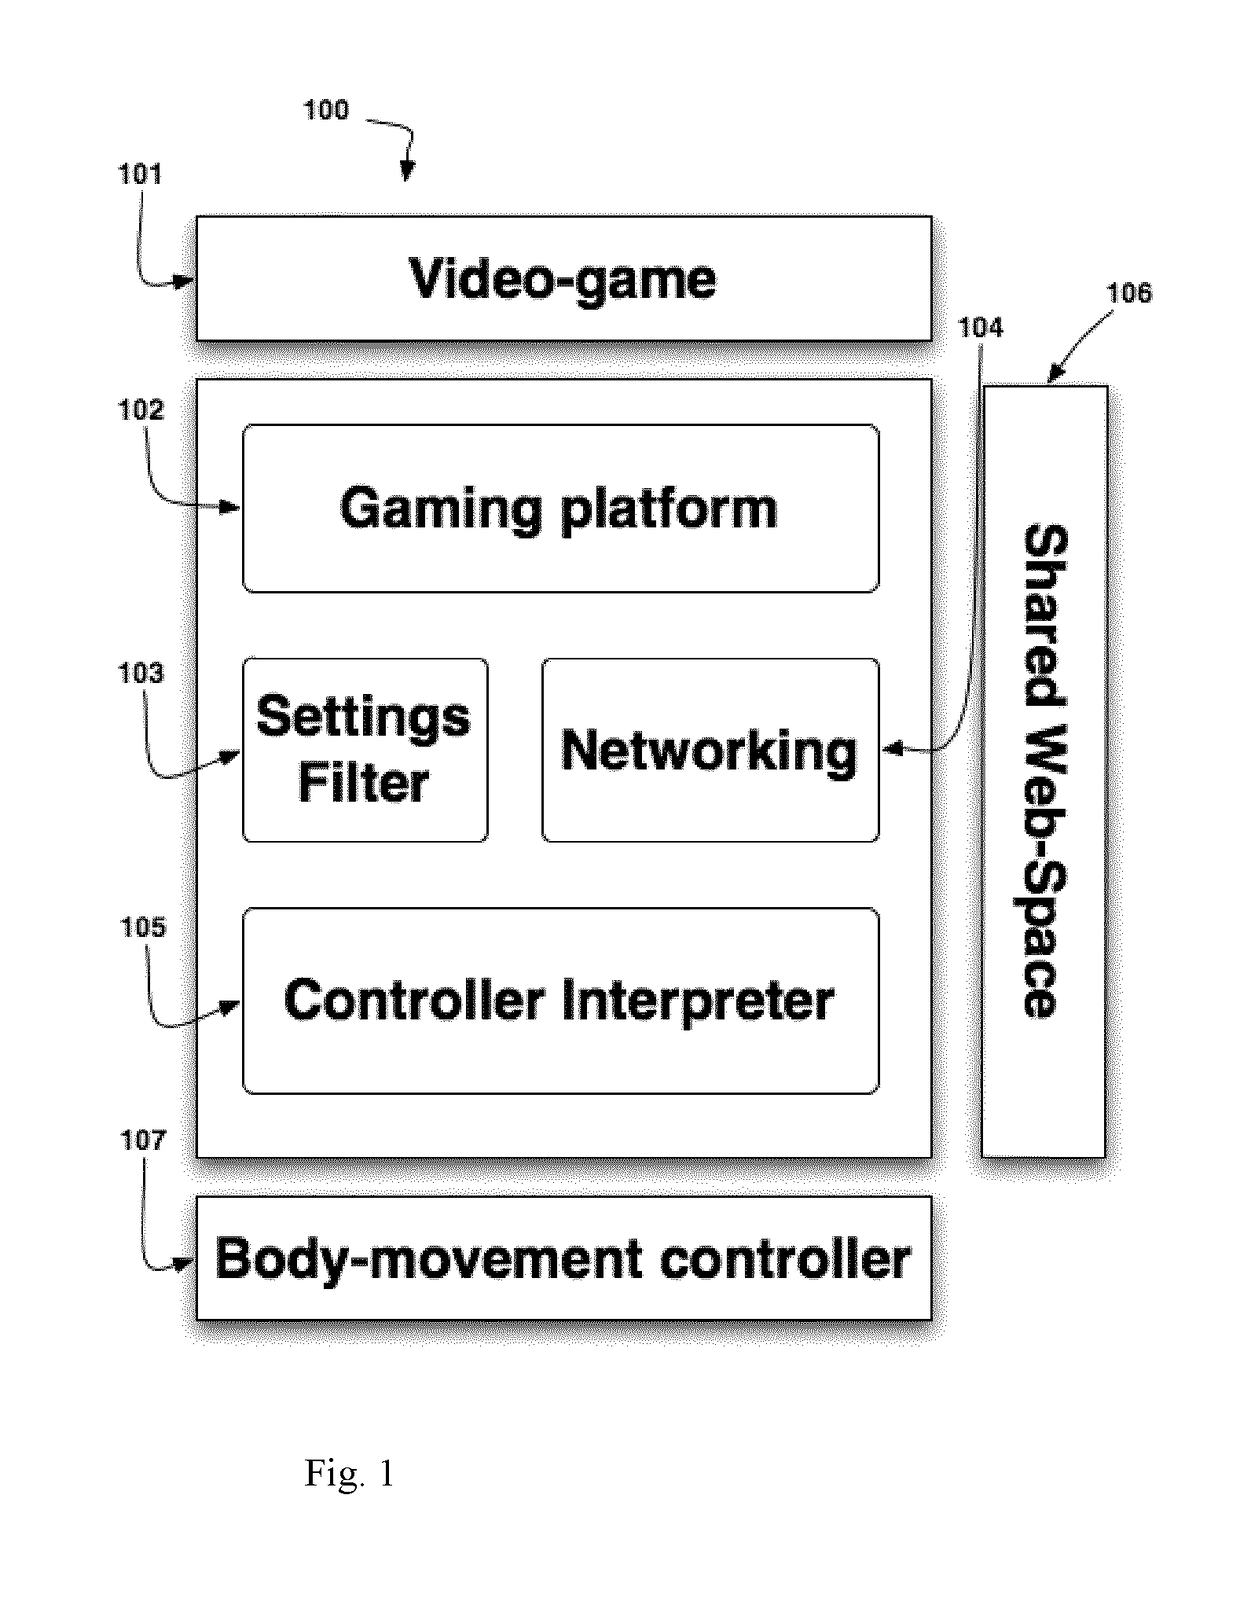 System and methods to remotely and asynchronously interact with rehabilitation video-games